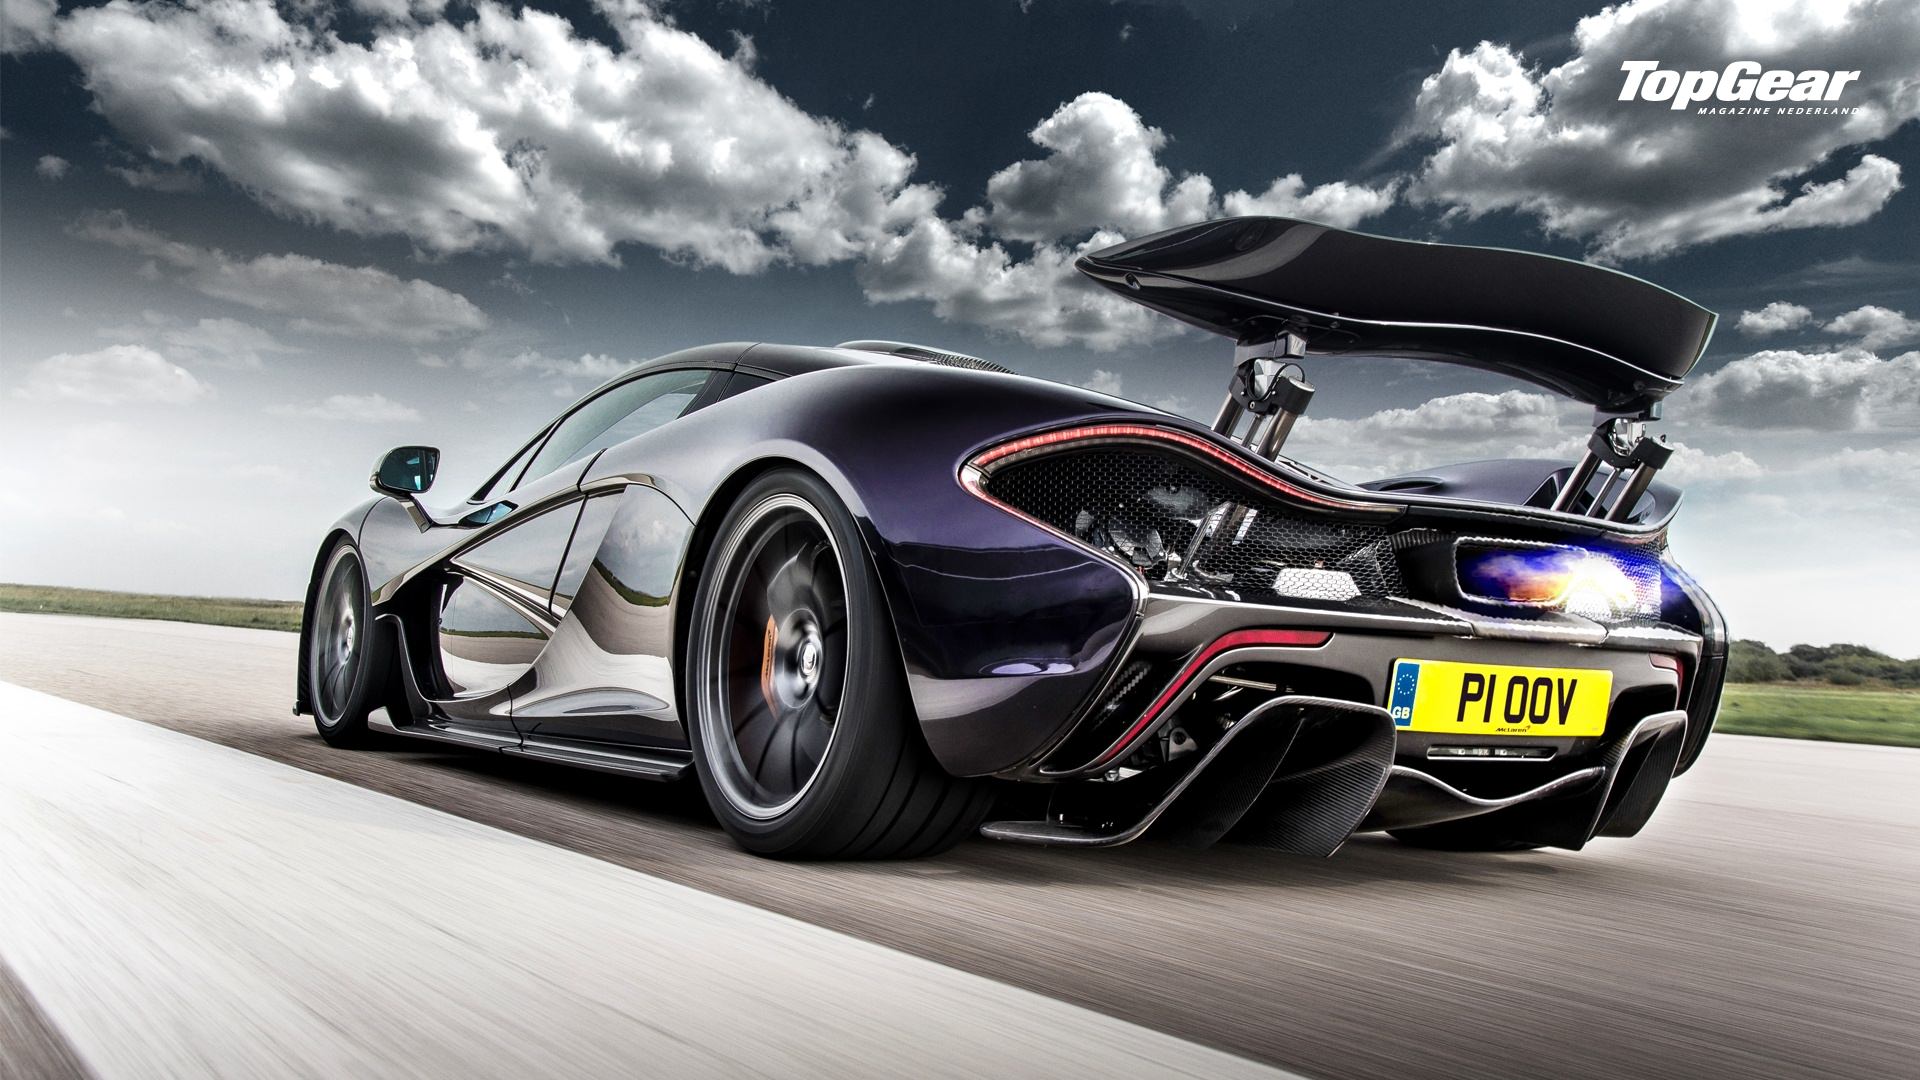 Awesome purple McLaren P1 rear side view shooting flames on the track - image via top